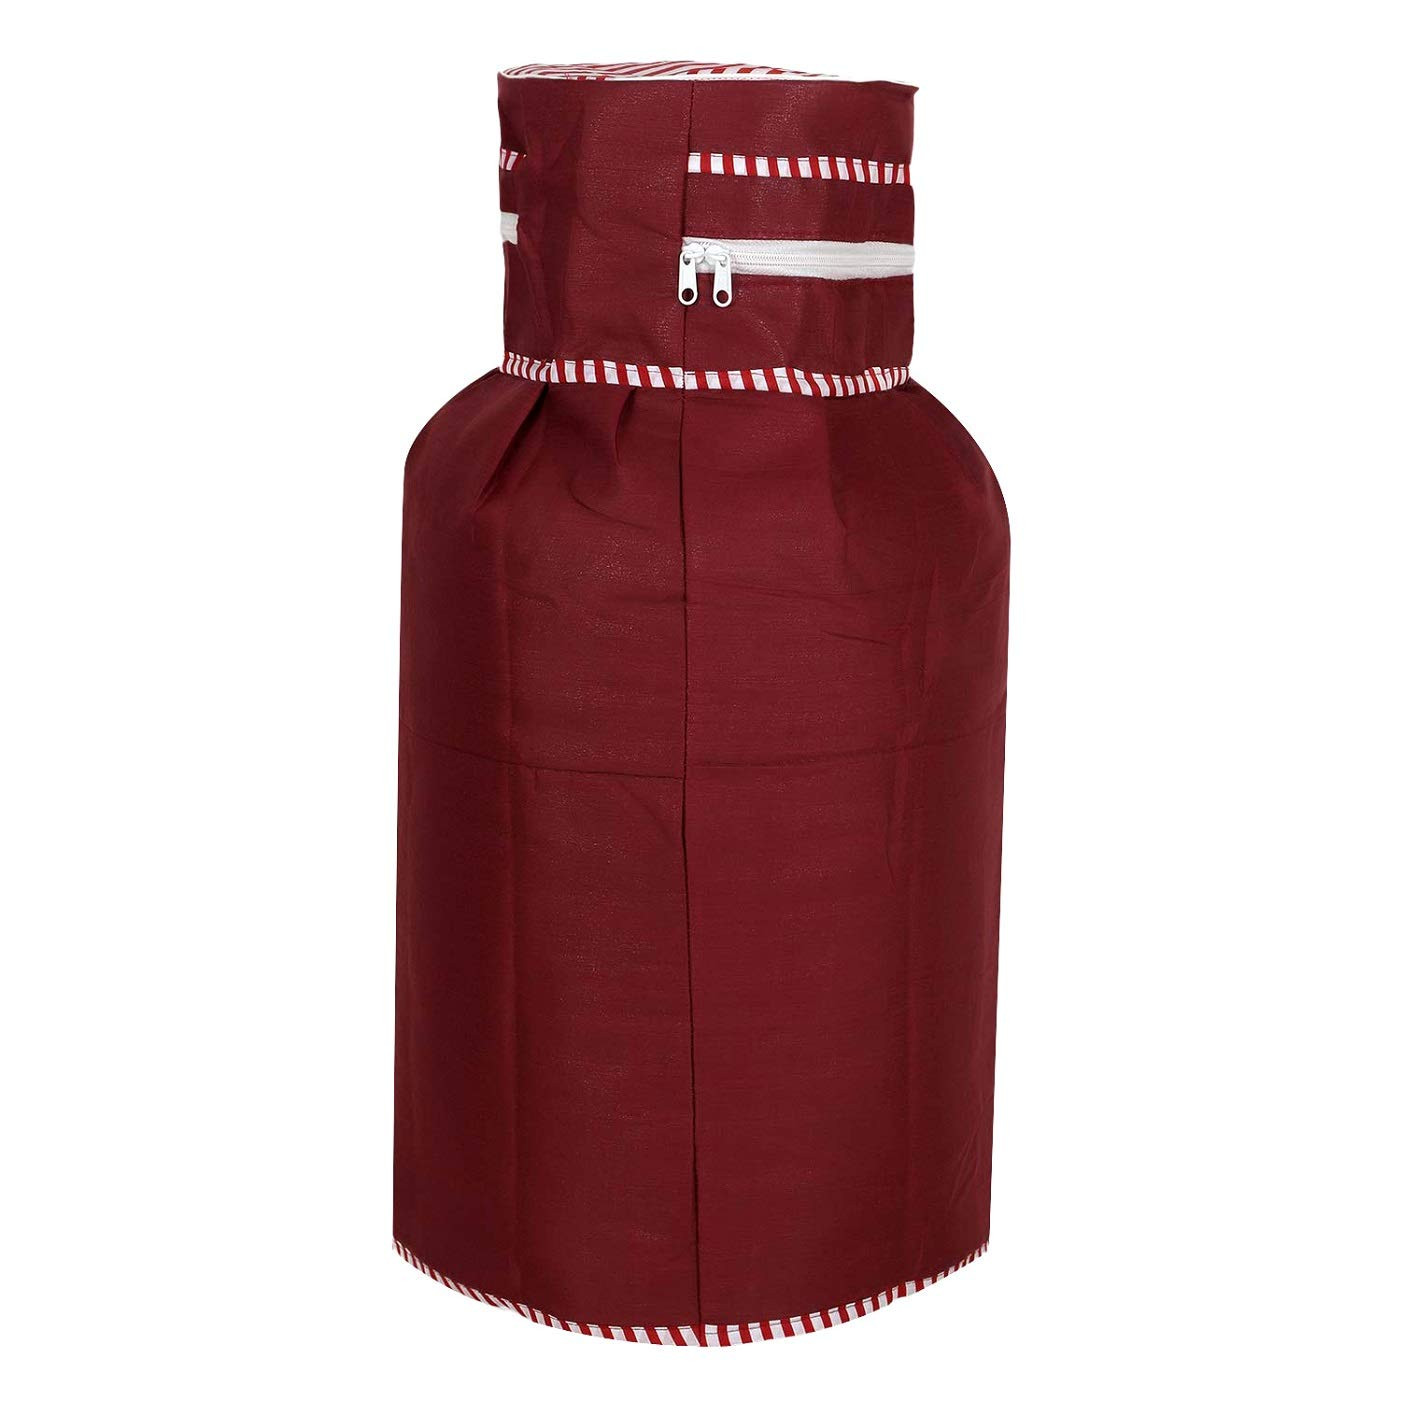 Kuber Industries 2 Pieces Cotton Dust-Water Proof LPG Gas Cylinder Cover (Red & Maroon) - CTKTC40751